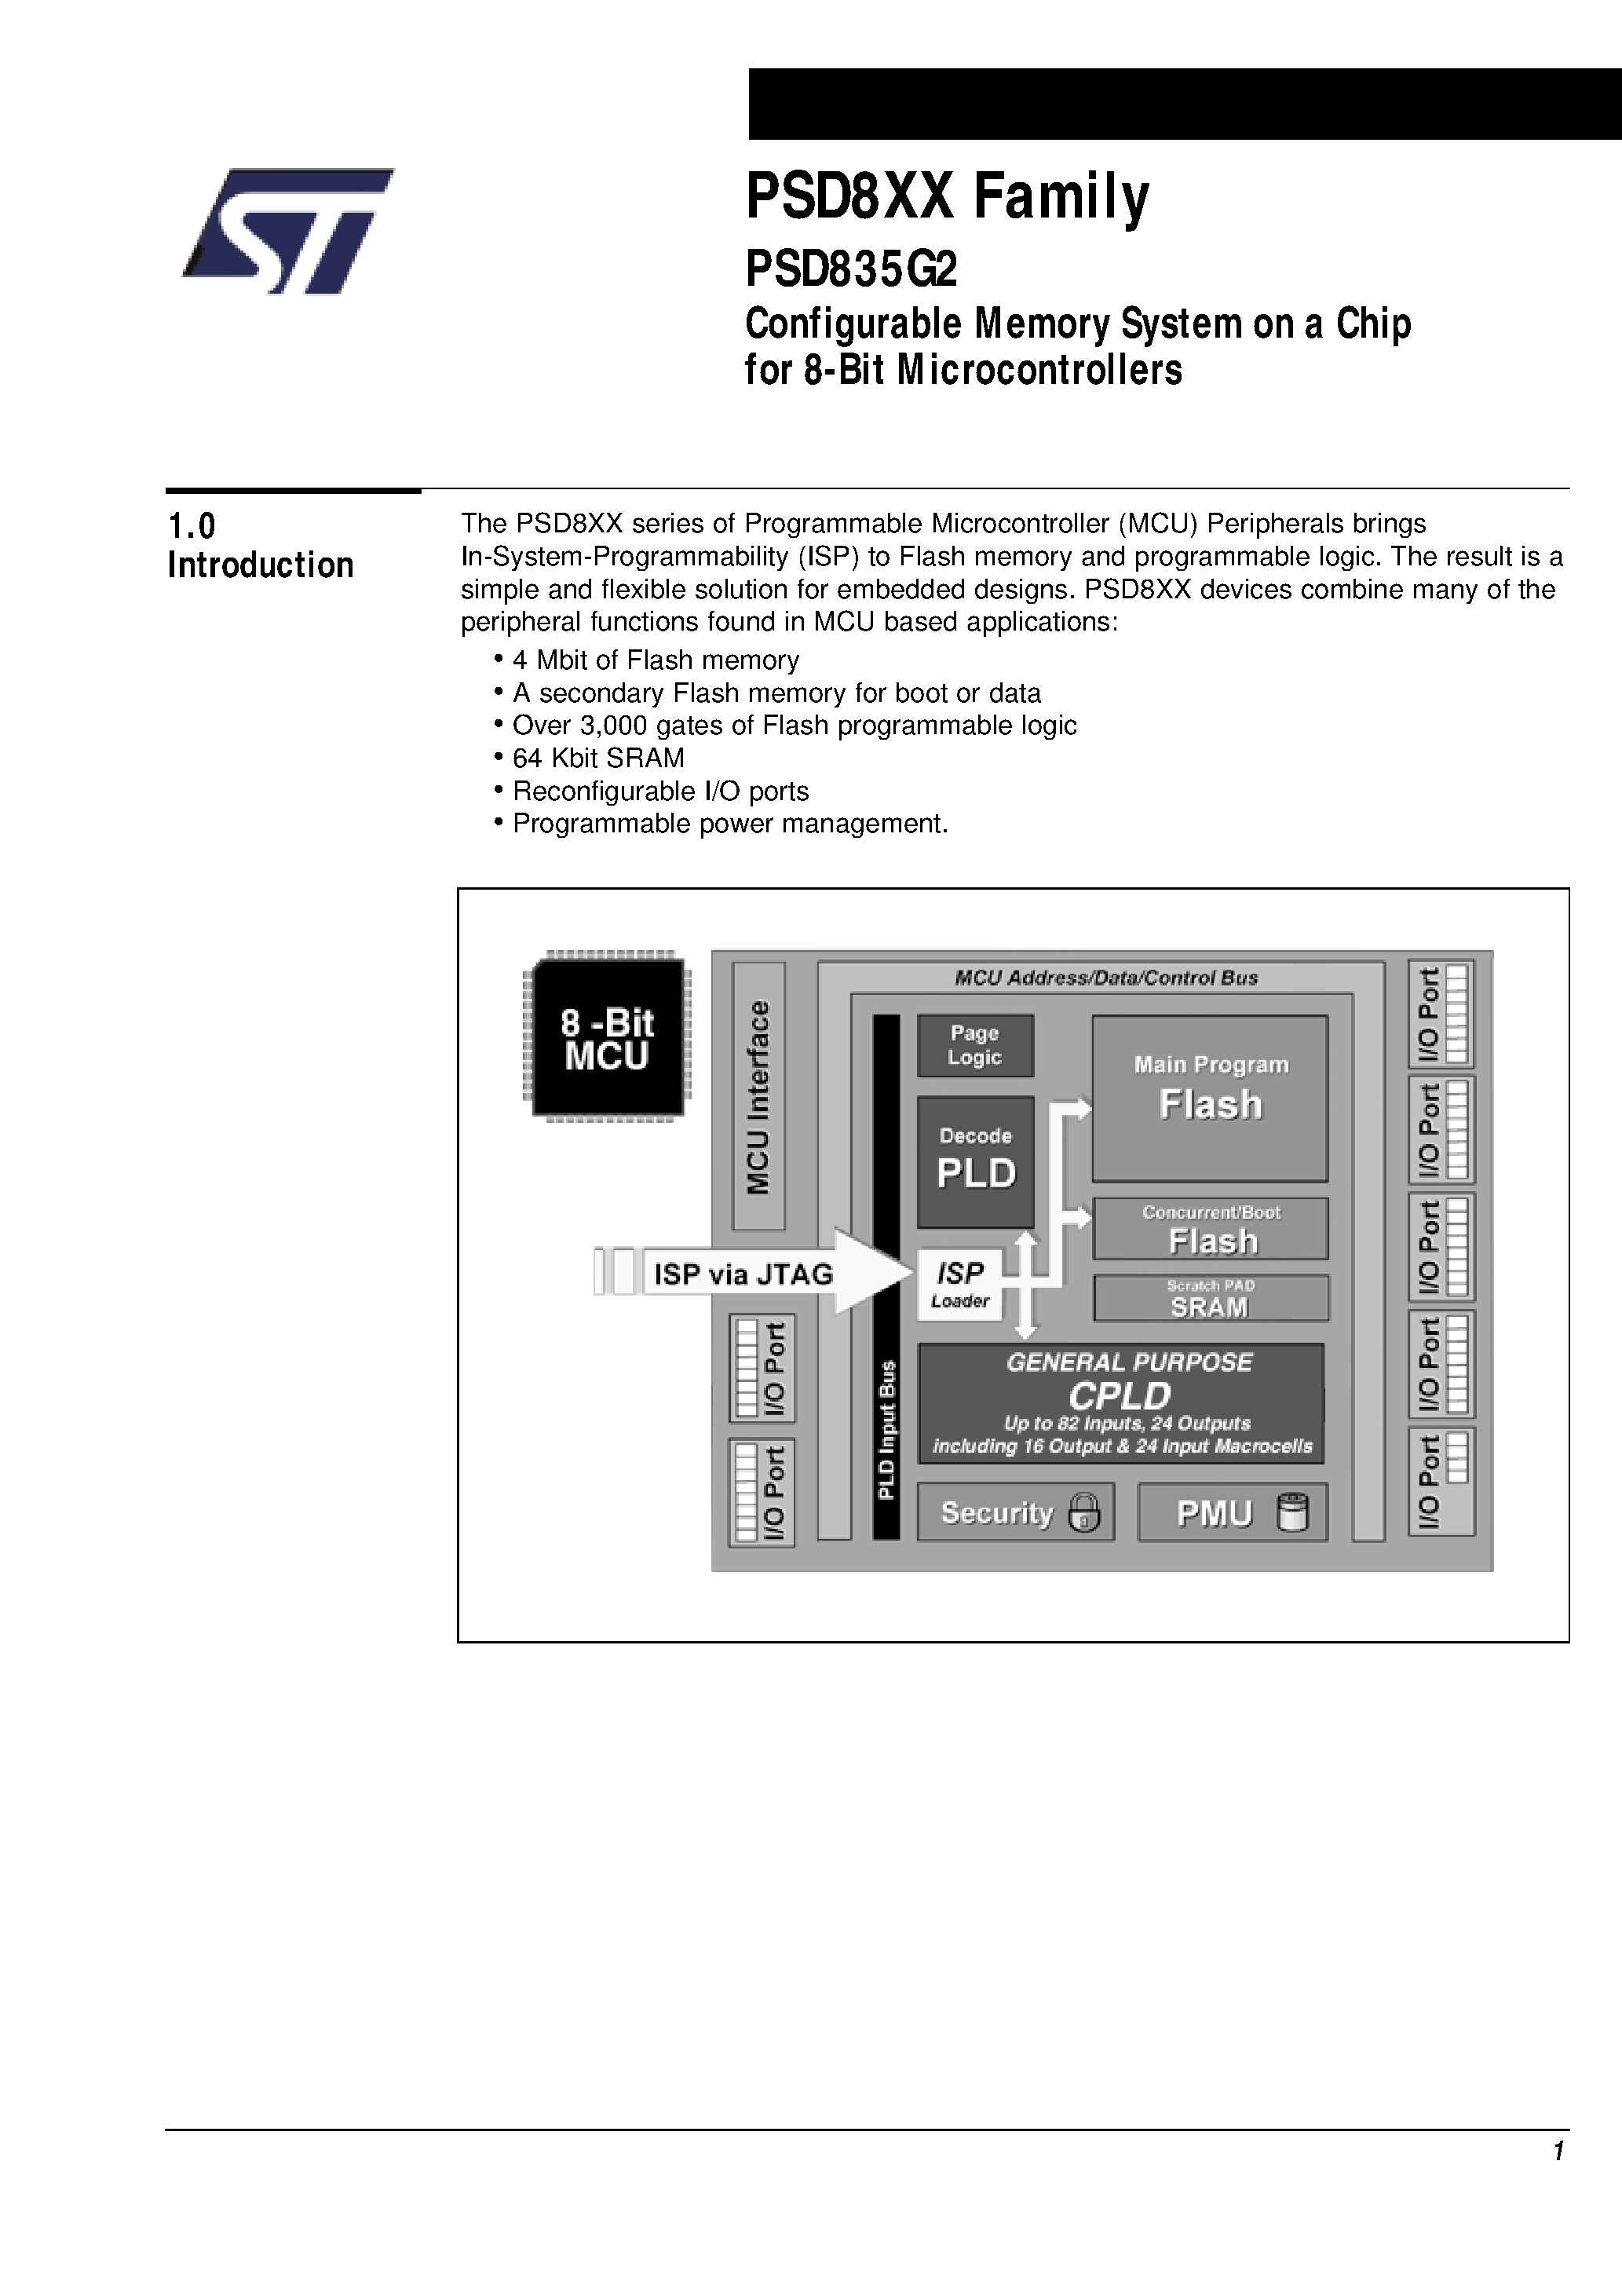 Datasheet PSD835F1V-A-70B81 - Configurable Memory System on a Chip for 8-Bit Microcontrollers page 2